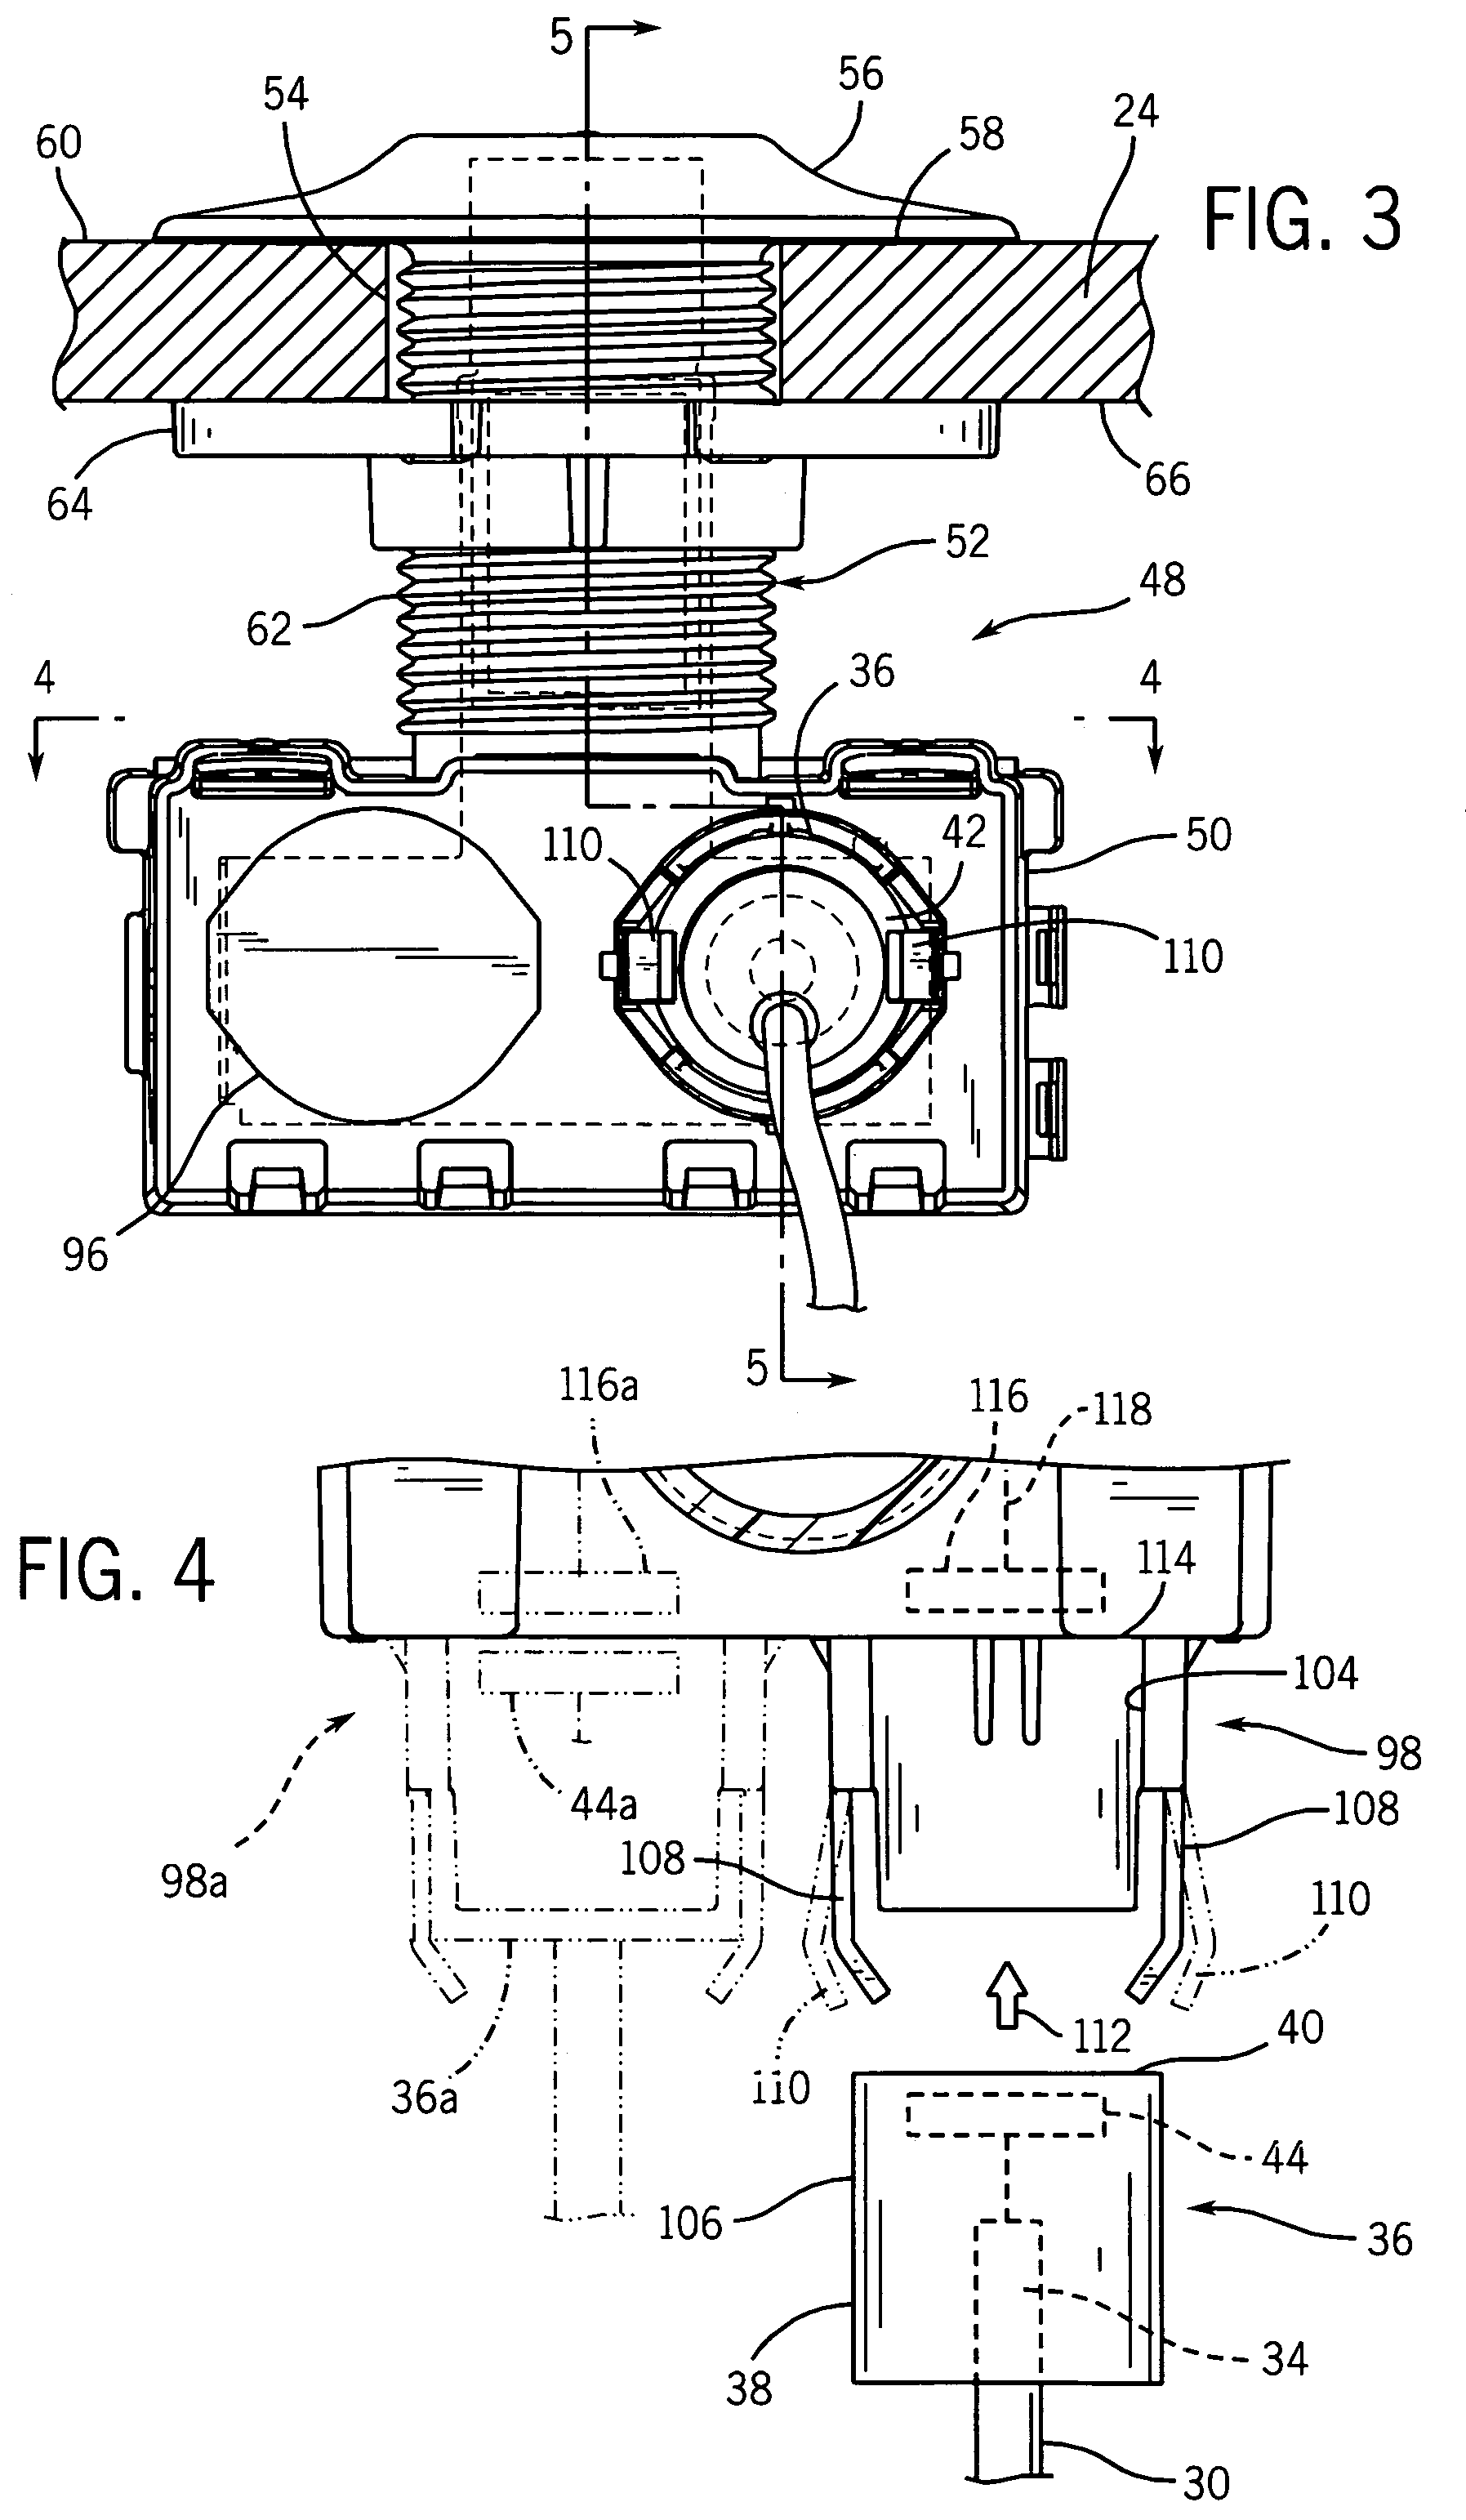 Method and apparatus for coupling a meter register to an automatic meter reading communication device